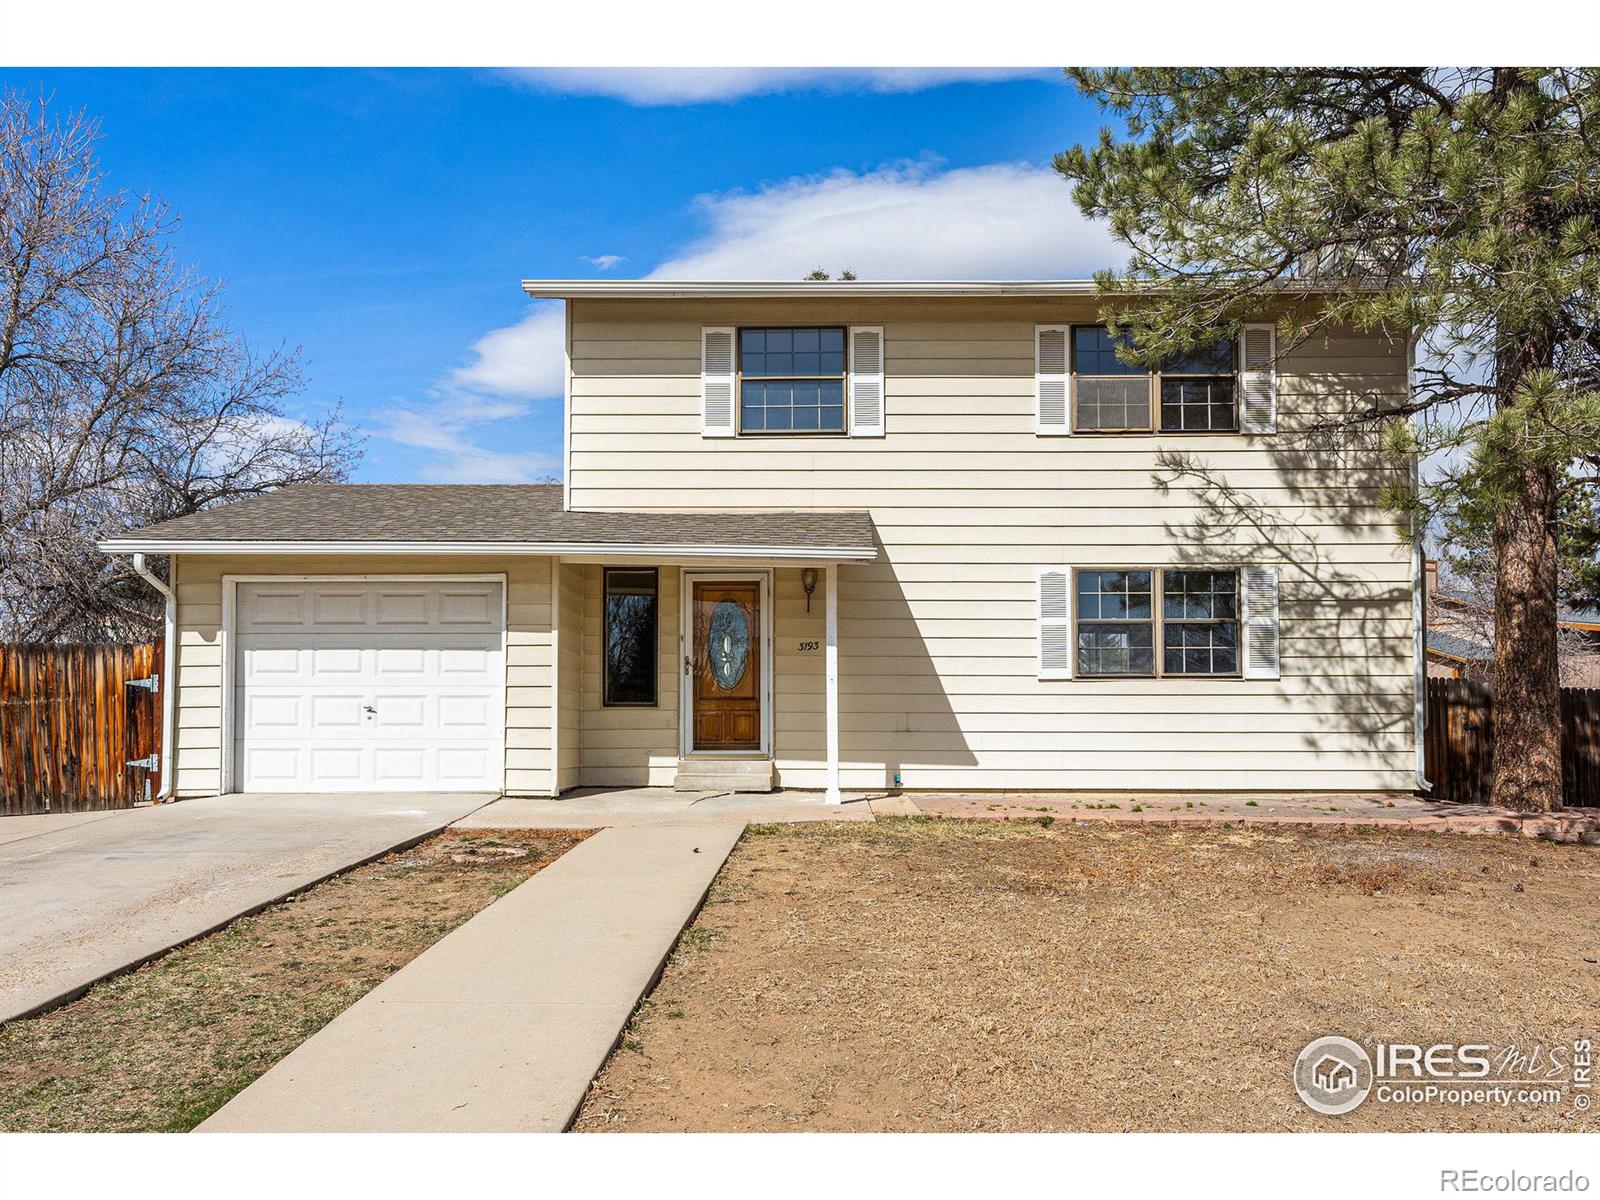 3193 w 134th circle, Broomfield sold home. Closed on 2024-04-18 for $450,000.